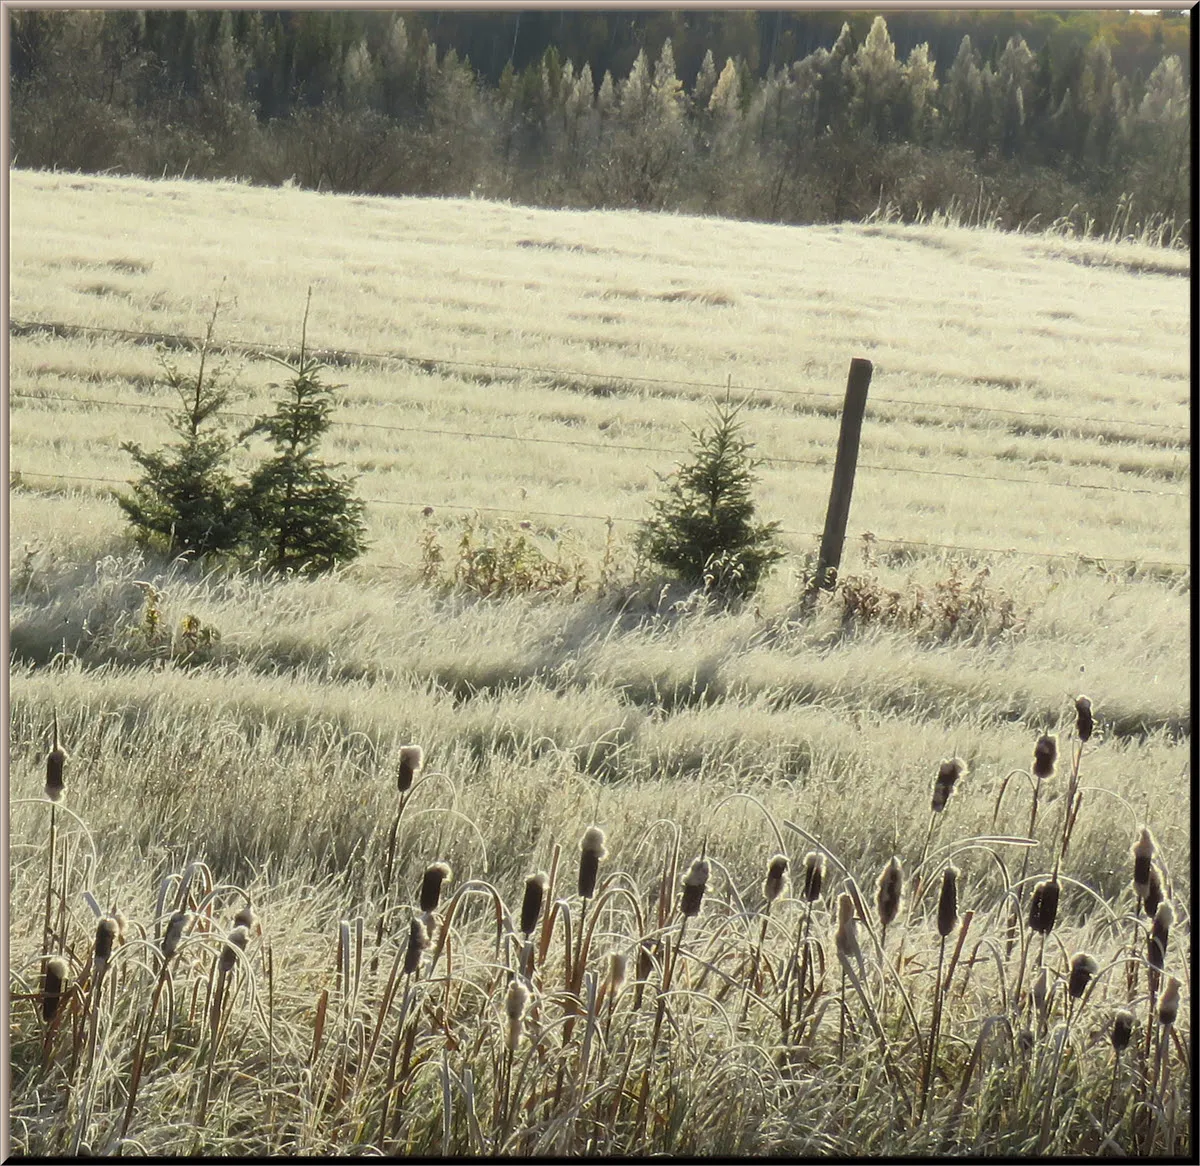 frost on the bulrushes by field.JPG